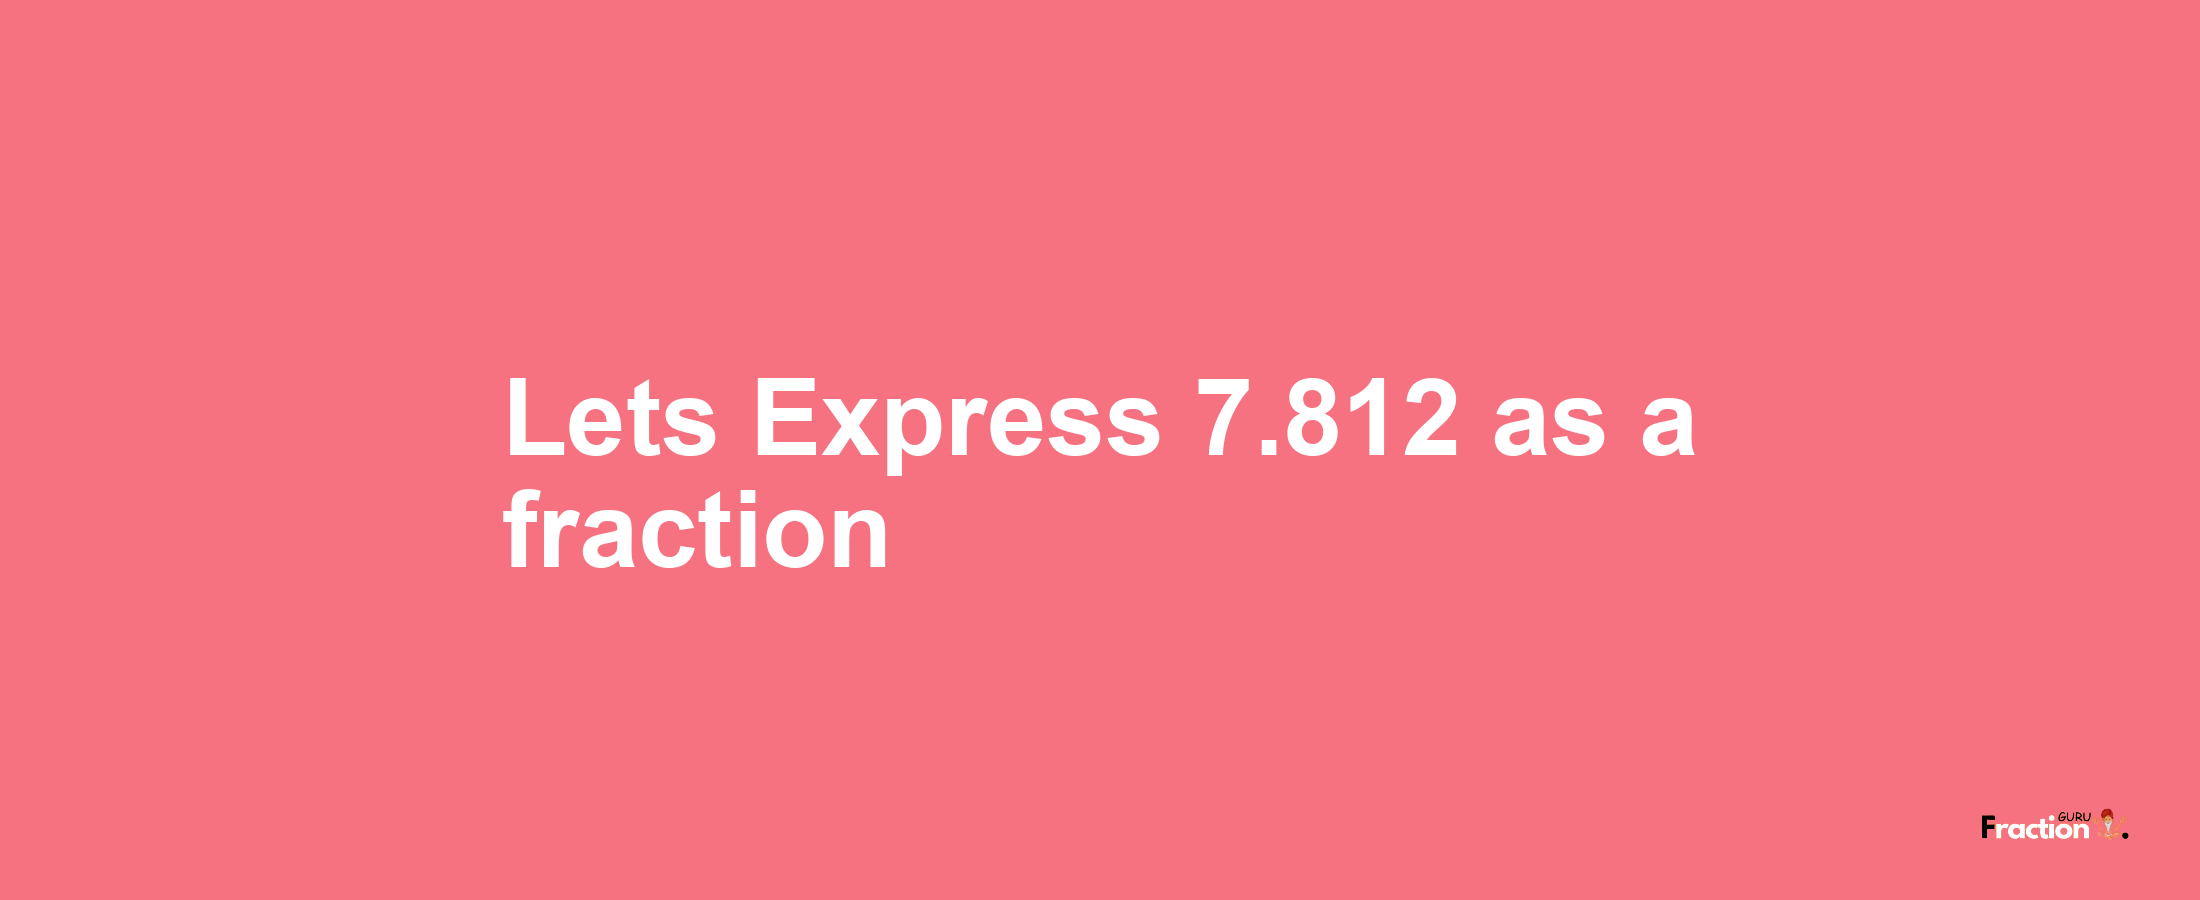 Lets Express 7.812 as afraction